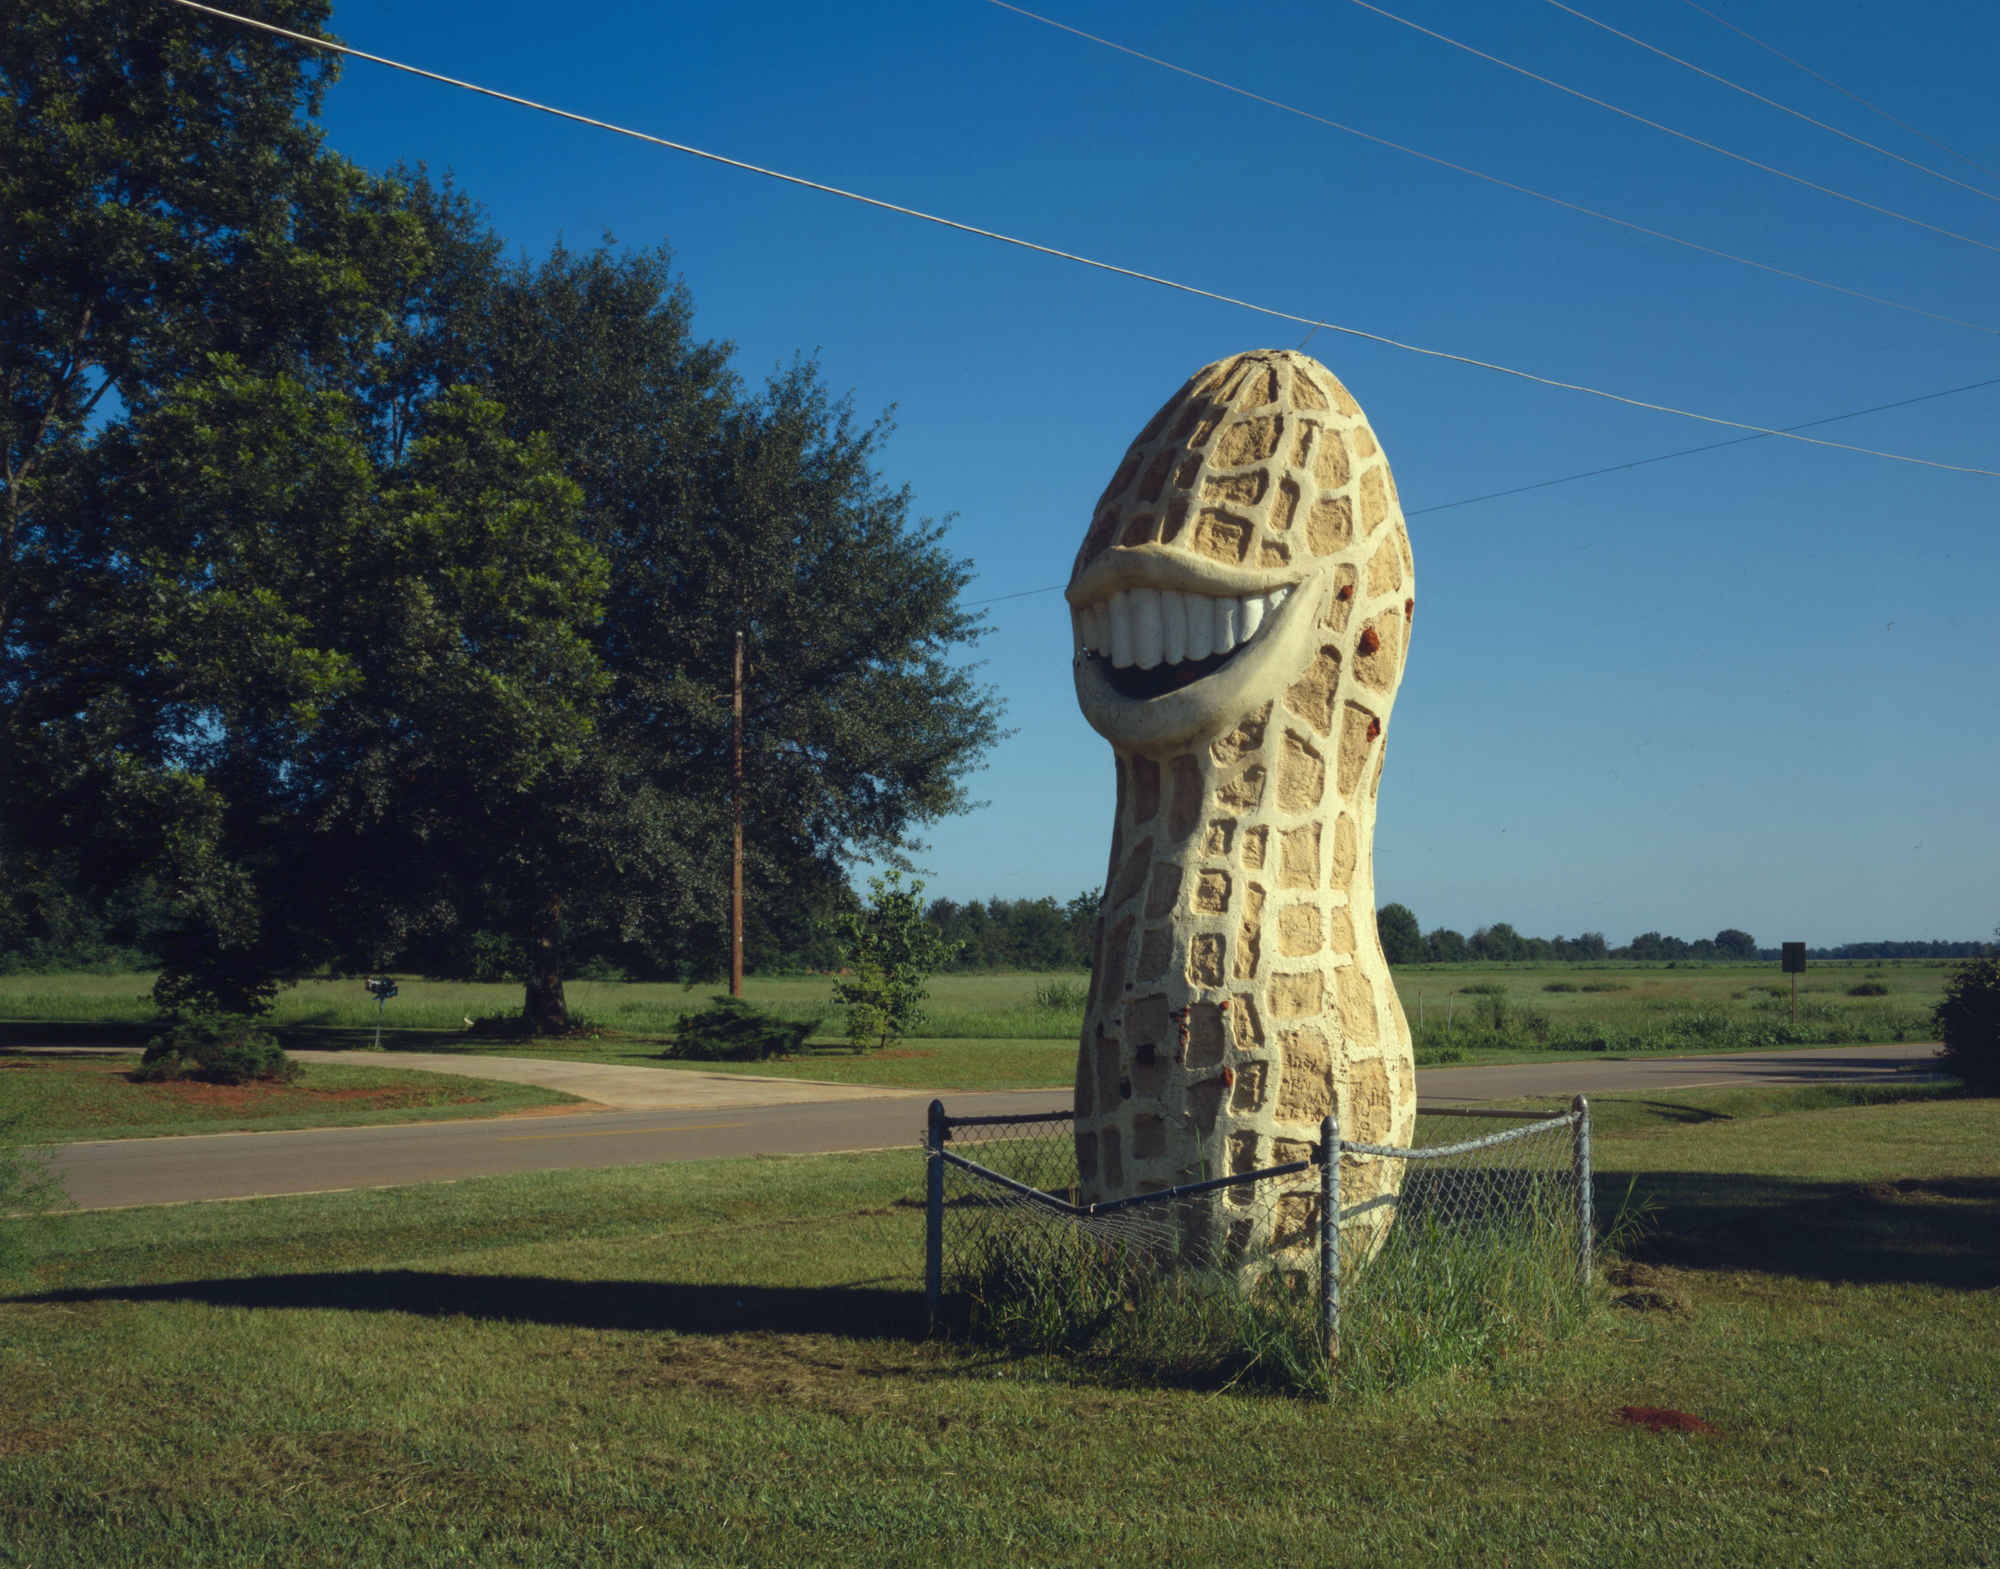 The Roadside Attraction